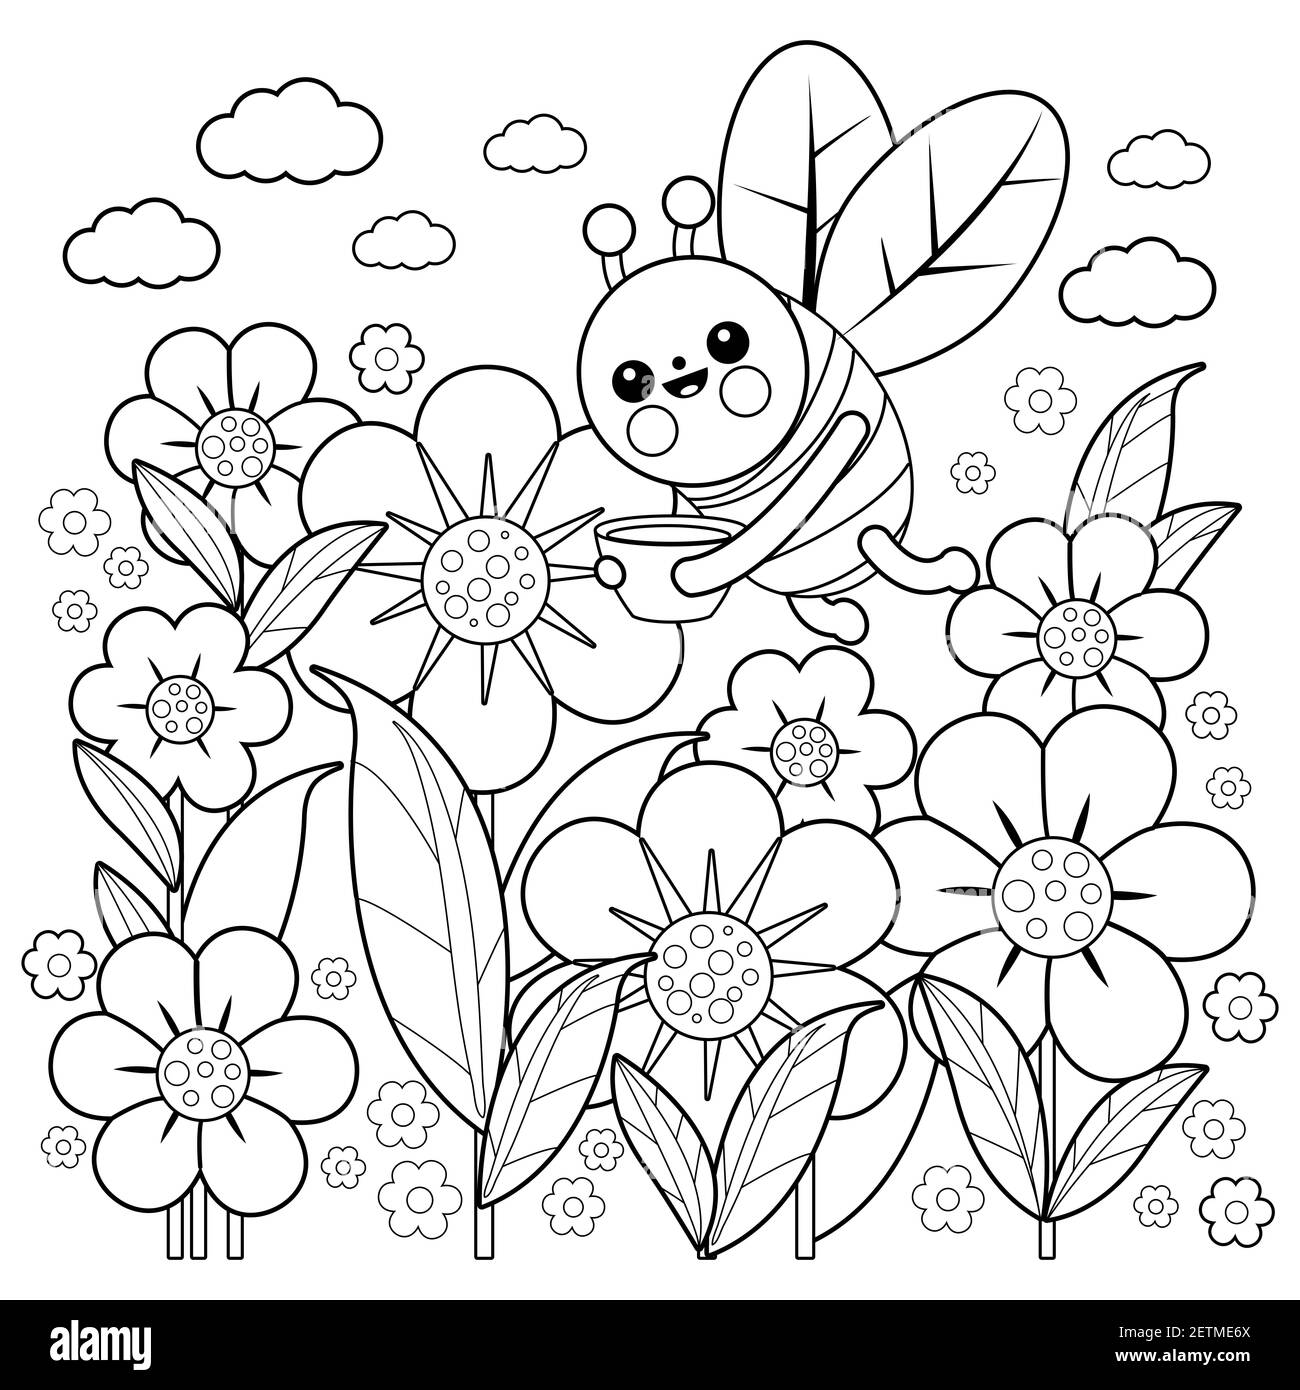 Cartoon of garden flowers Black and White Stock Photos & Images ...